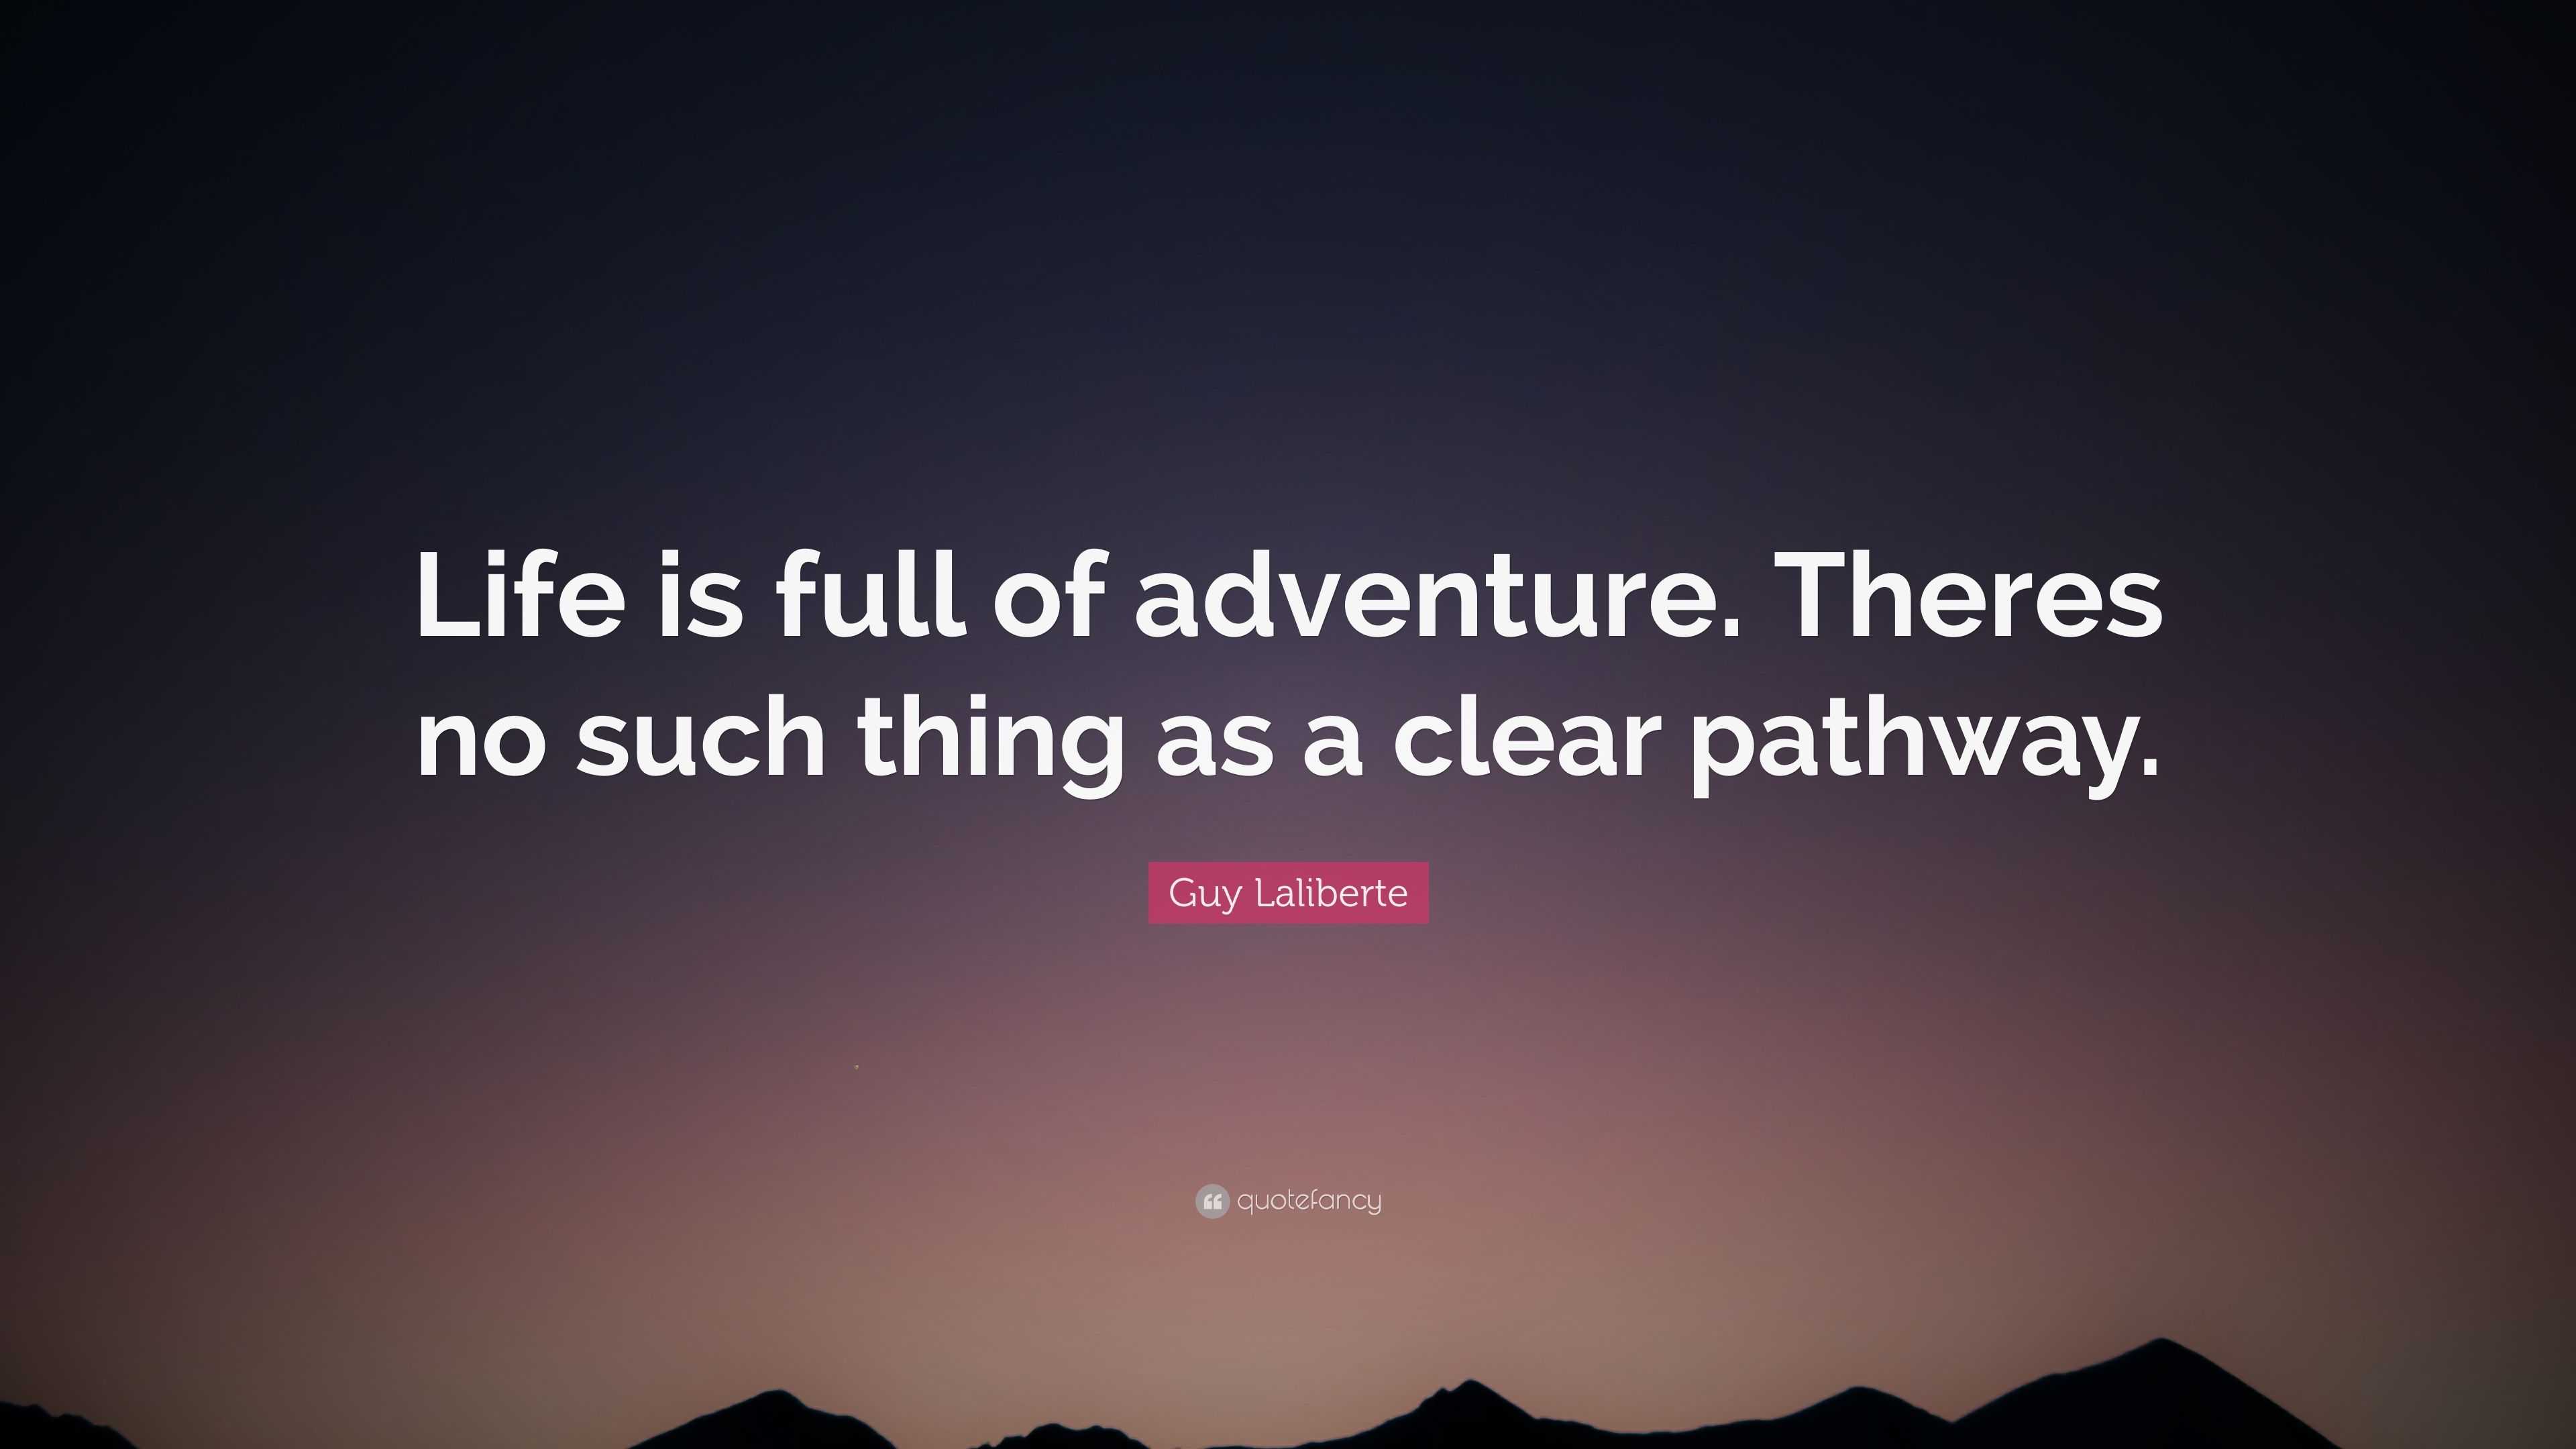 Guy Laliberte Quote: “Life is full of adventure. Theres no such thing